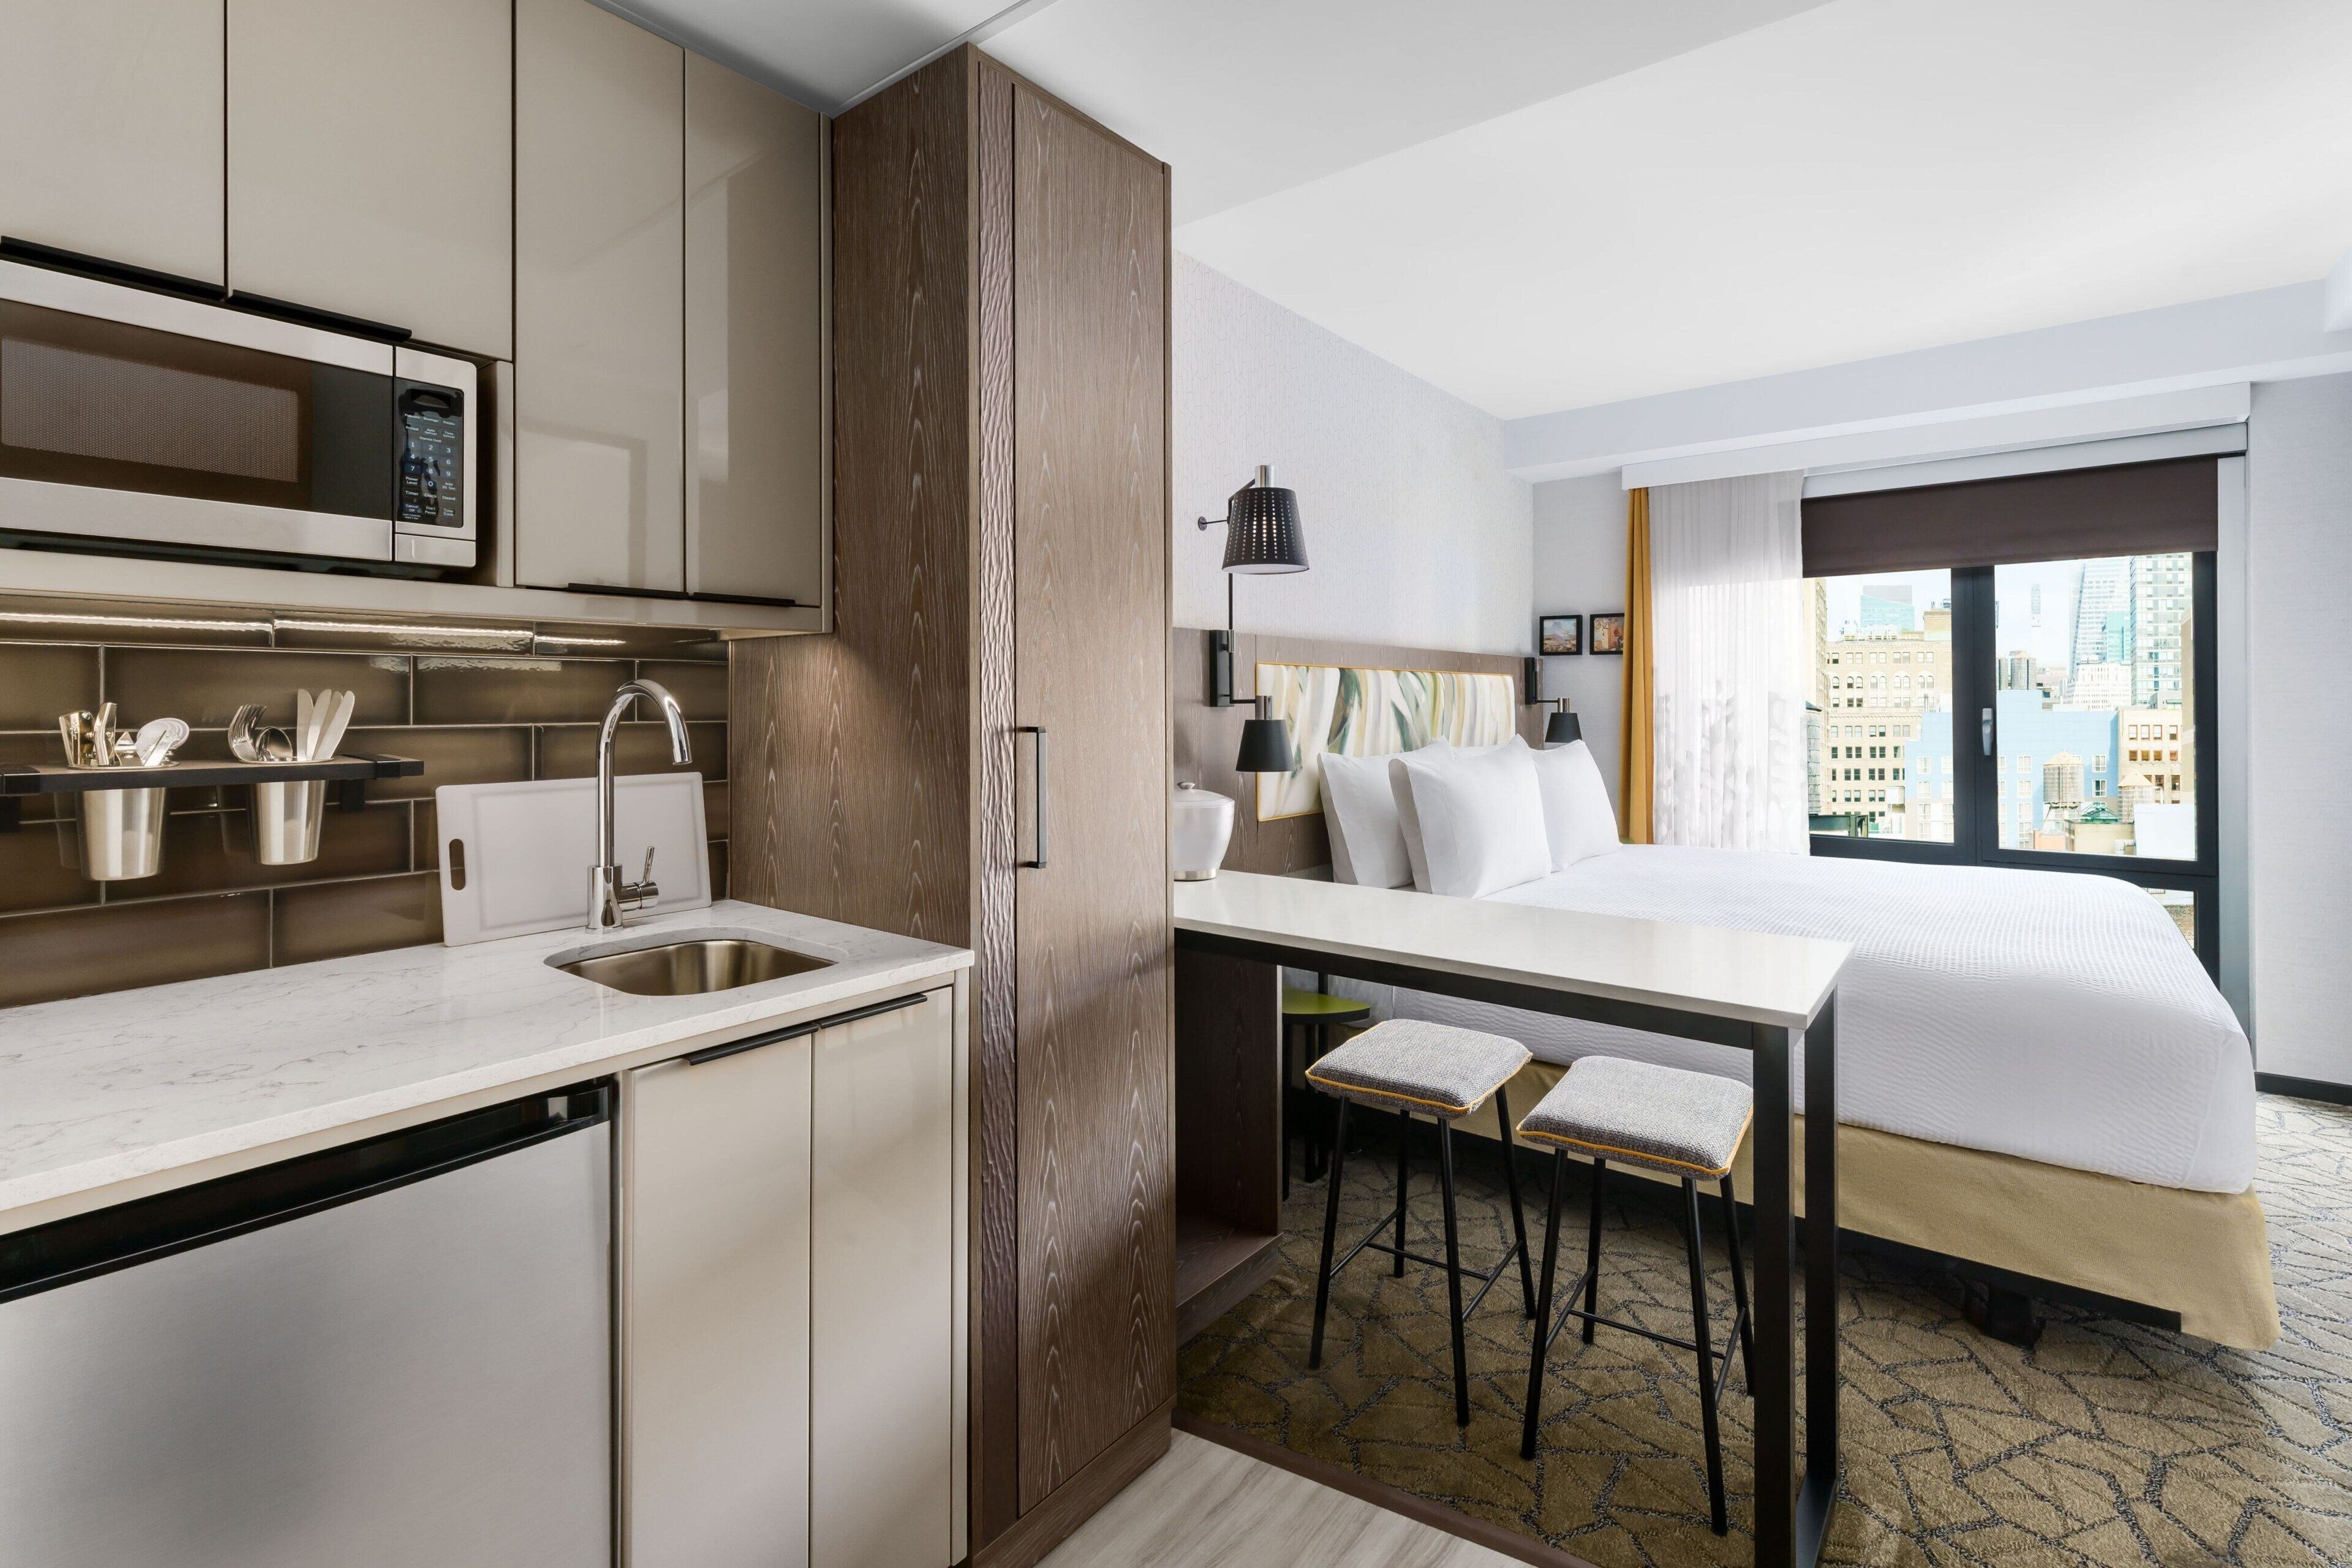 TownePlace Suites New York Manhattan/Chelsea